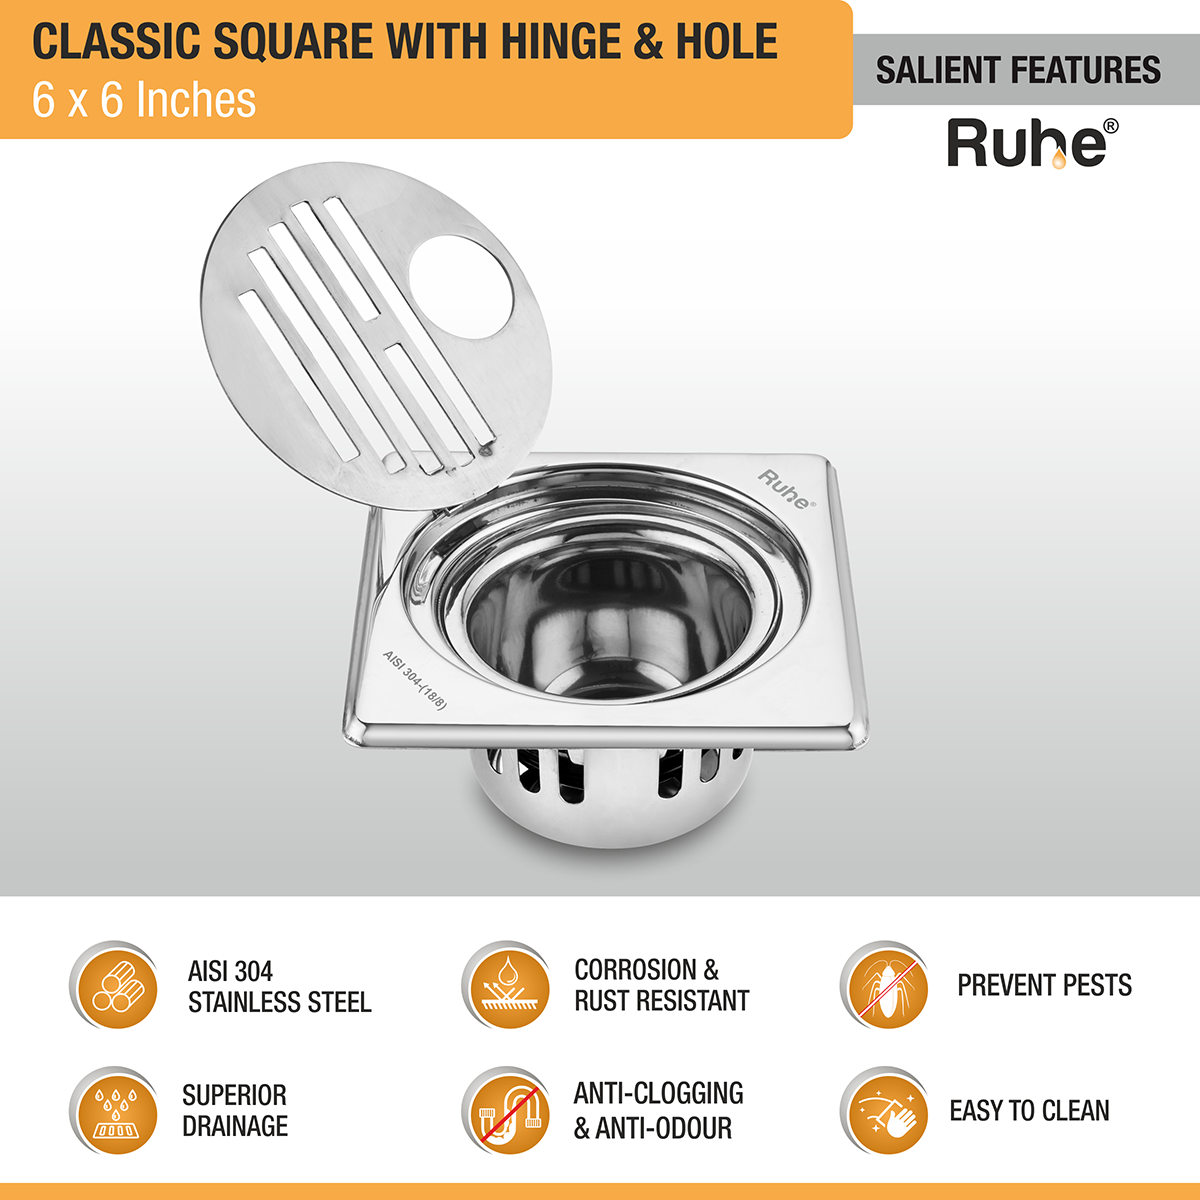 Classic Square Floor Drain (6 x 6 Inches) with Hinge, Hole & Cockroach Trap (304 Grade) features